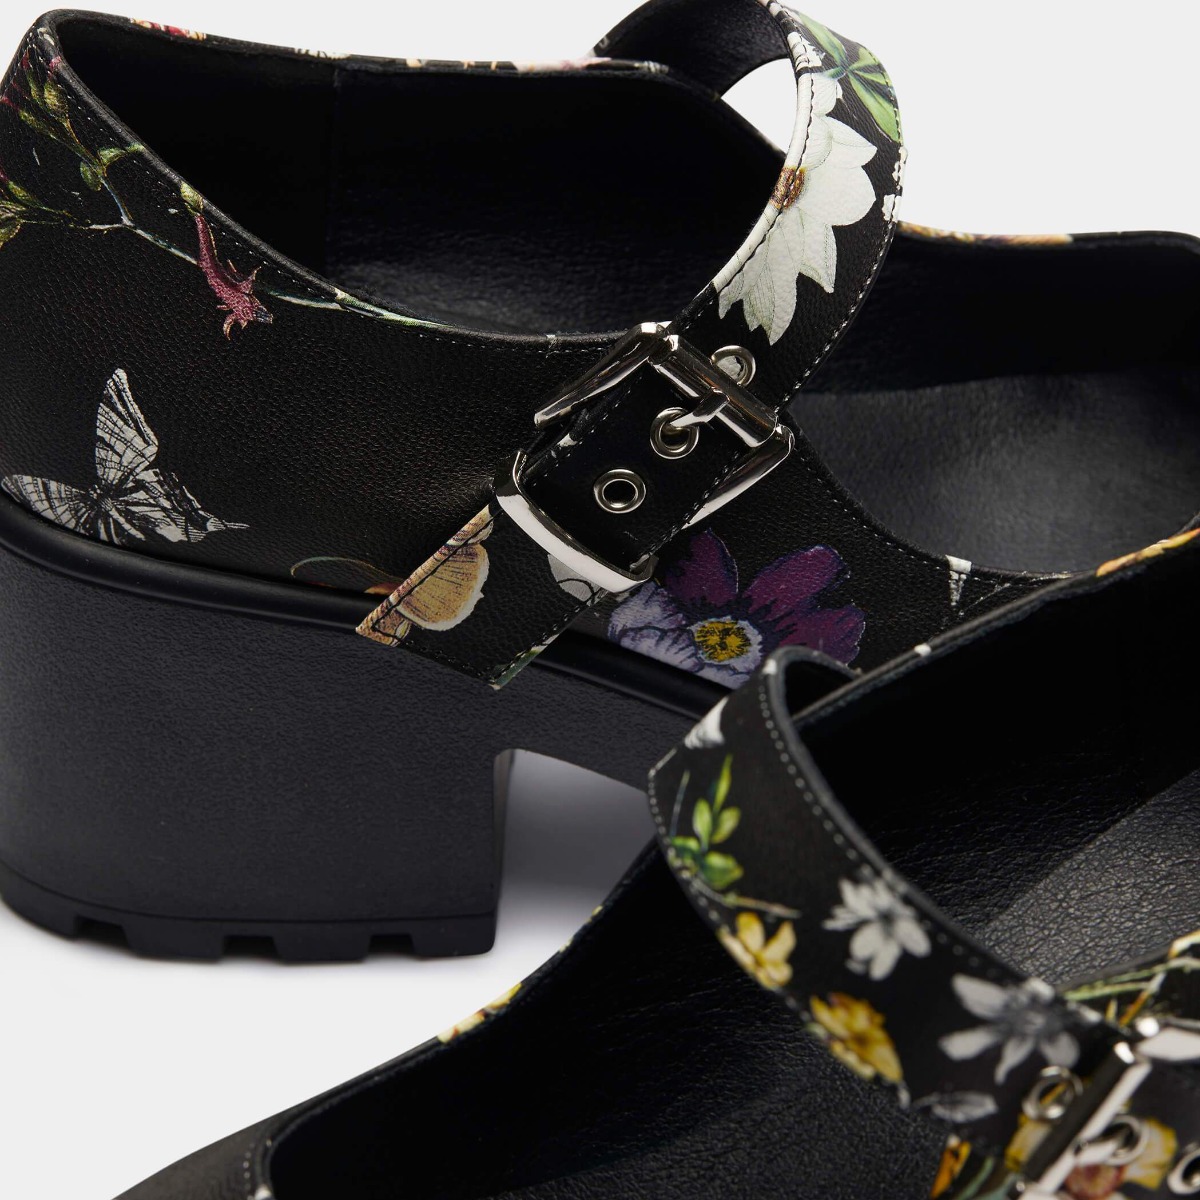 kfnd68bbb_chaussures-mary-jane-plateforme-gothique-glam-rock-tira-floral